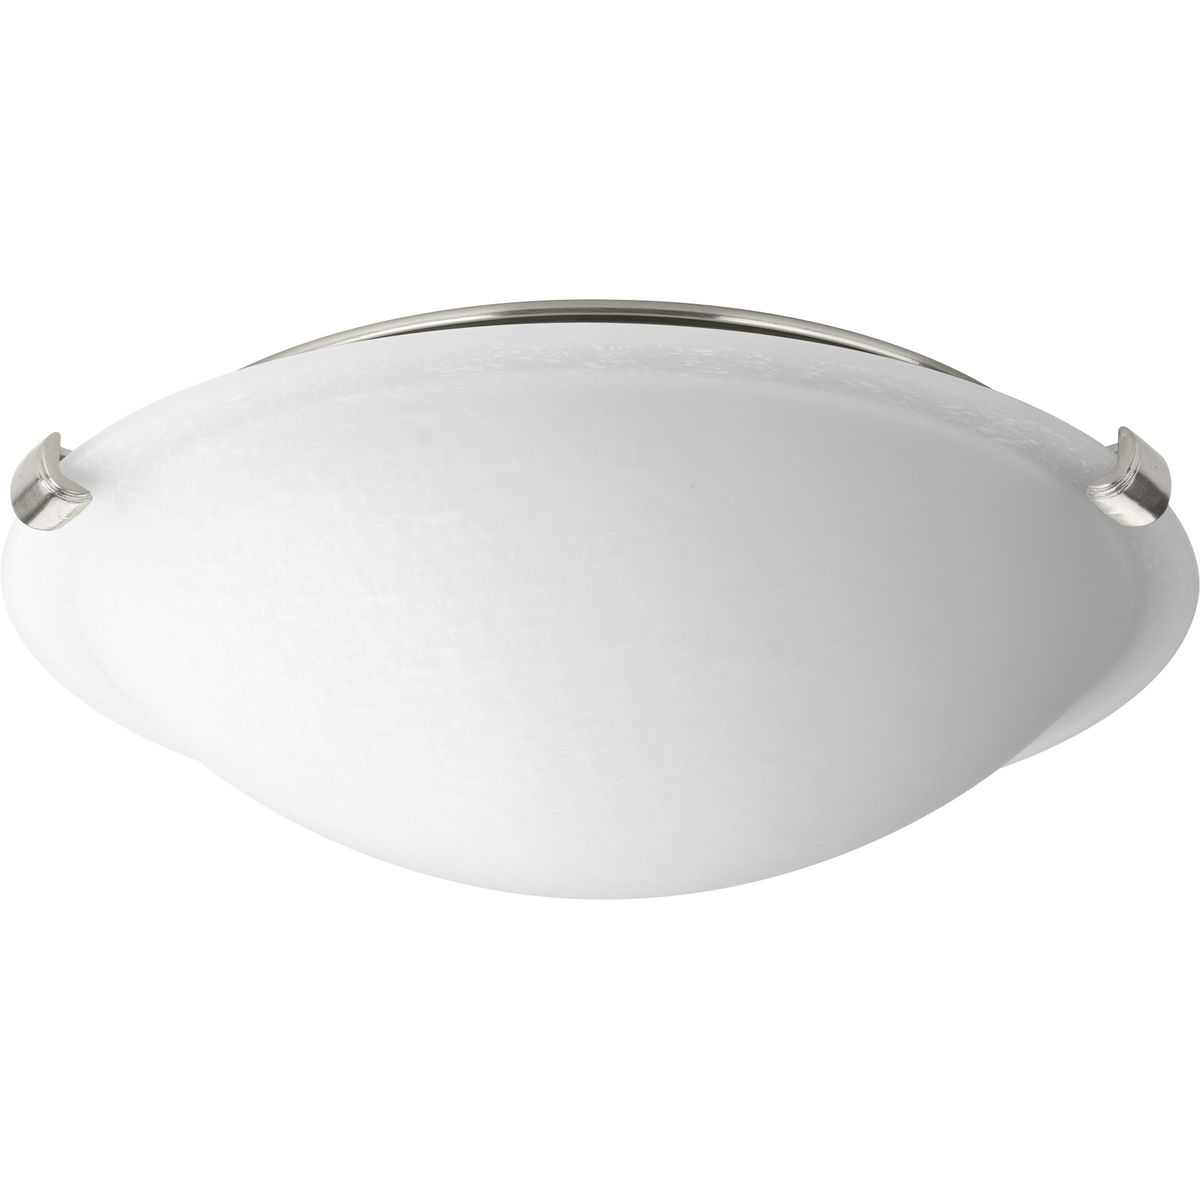 A 12 in domed, linen finish glass diffuser is discreetly supported from Brushed Nickel metal fittings and encloses an LED light source. 1,000 lumens 90+ CRI, 3000K.